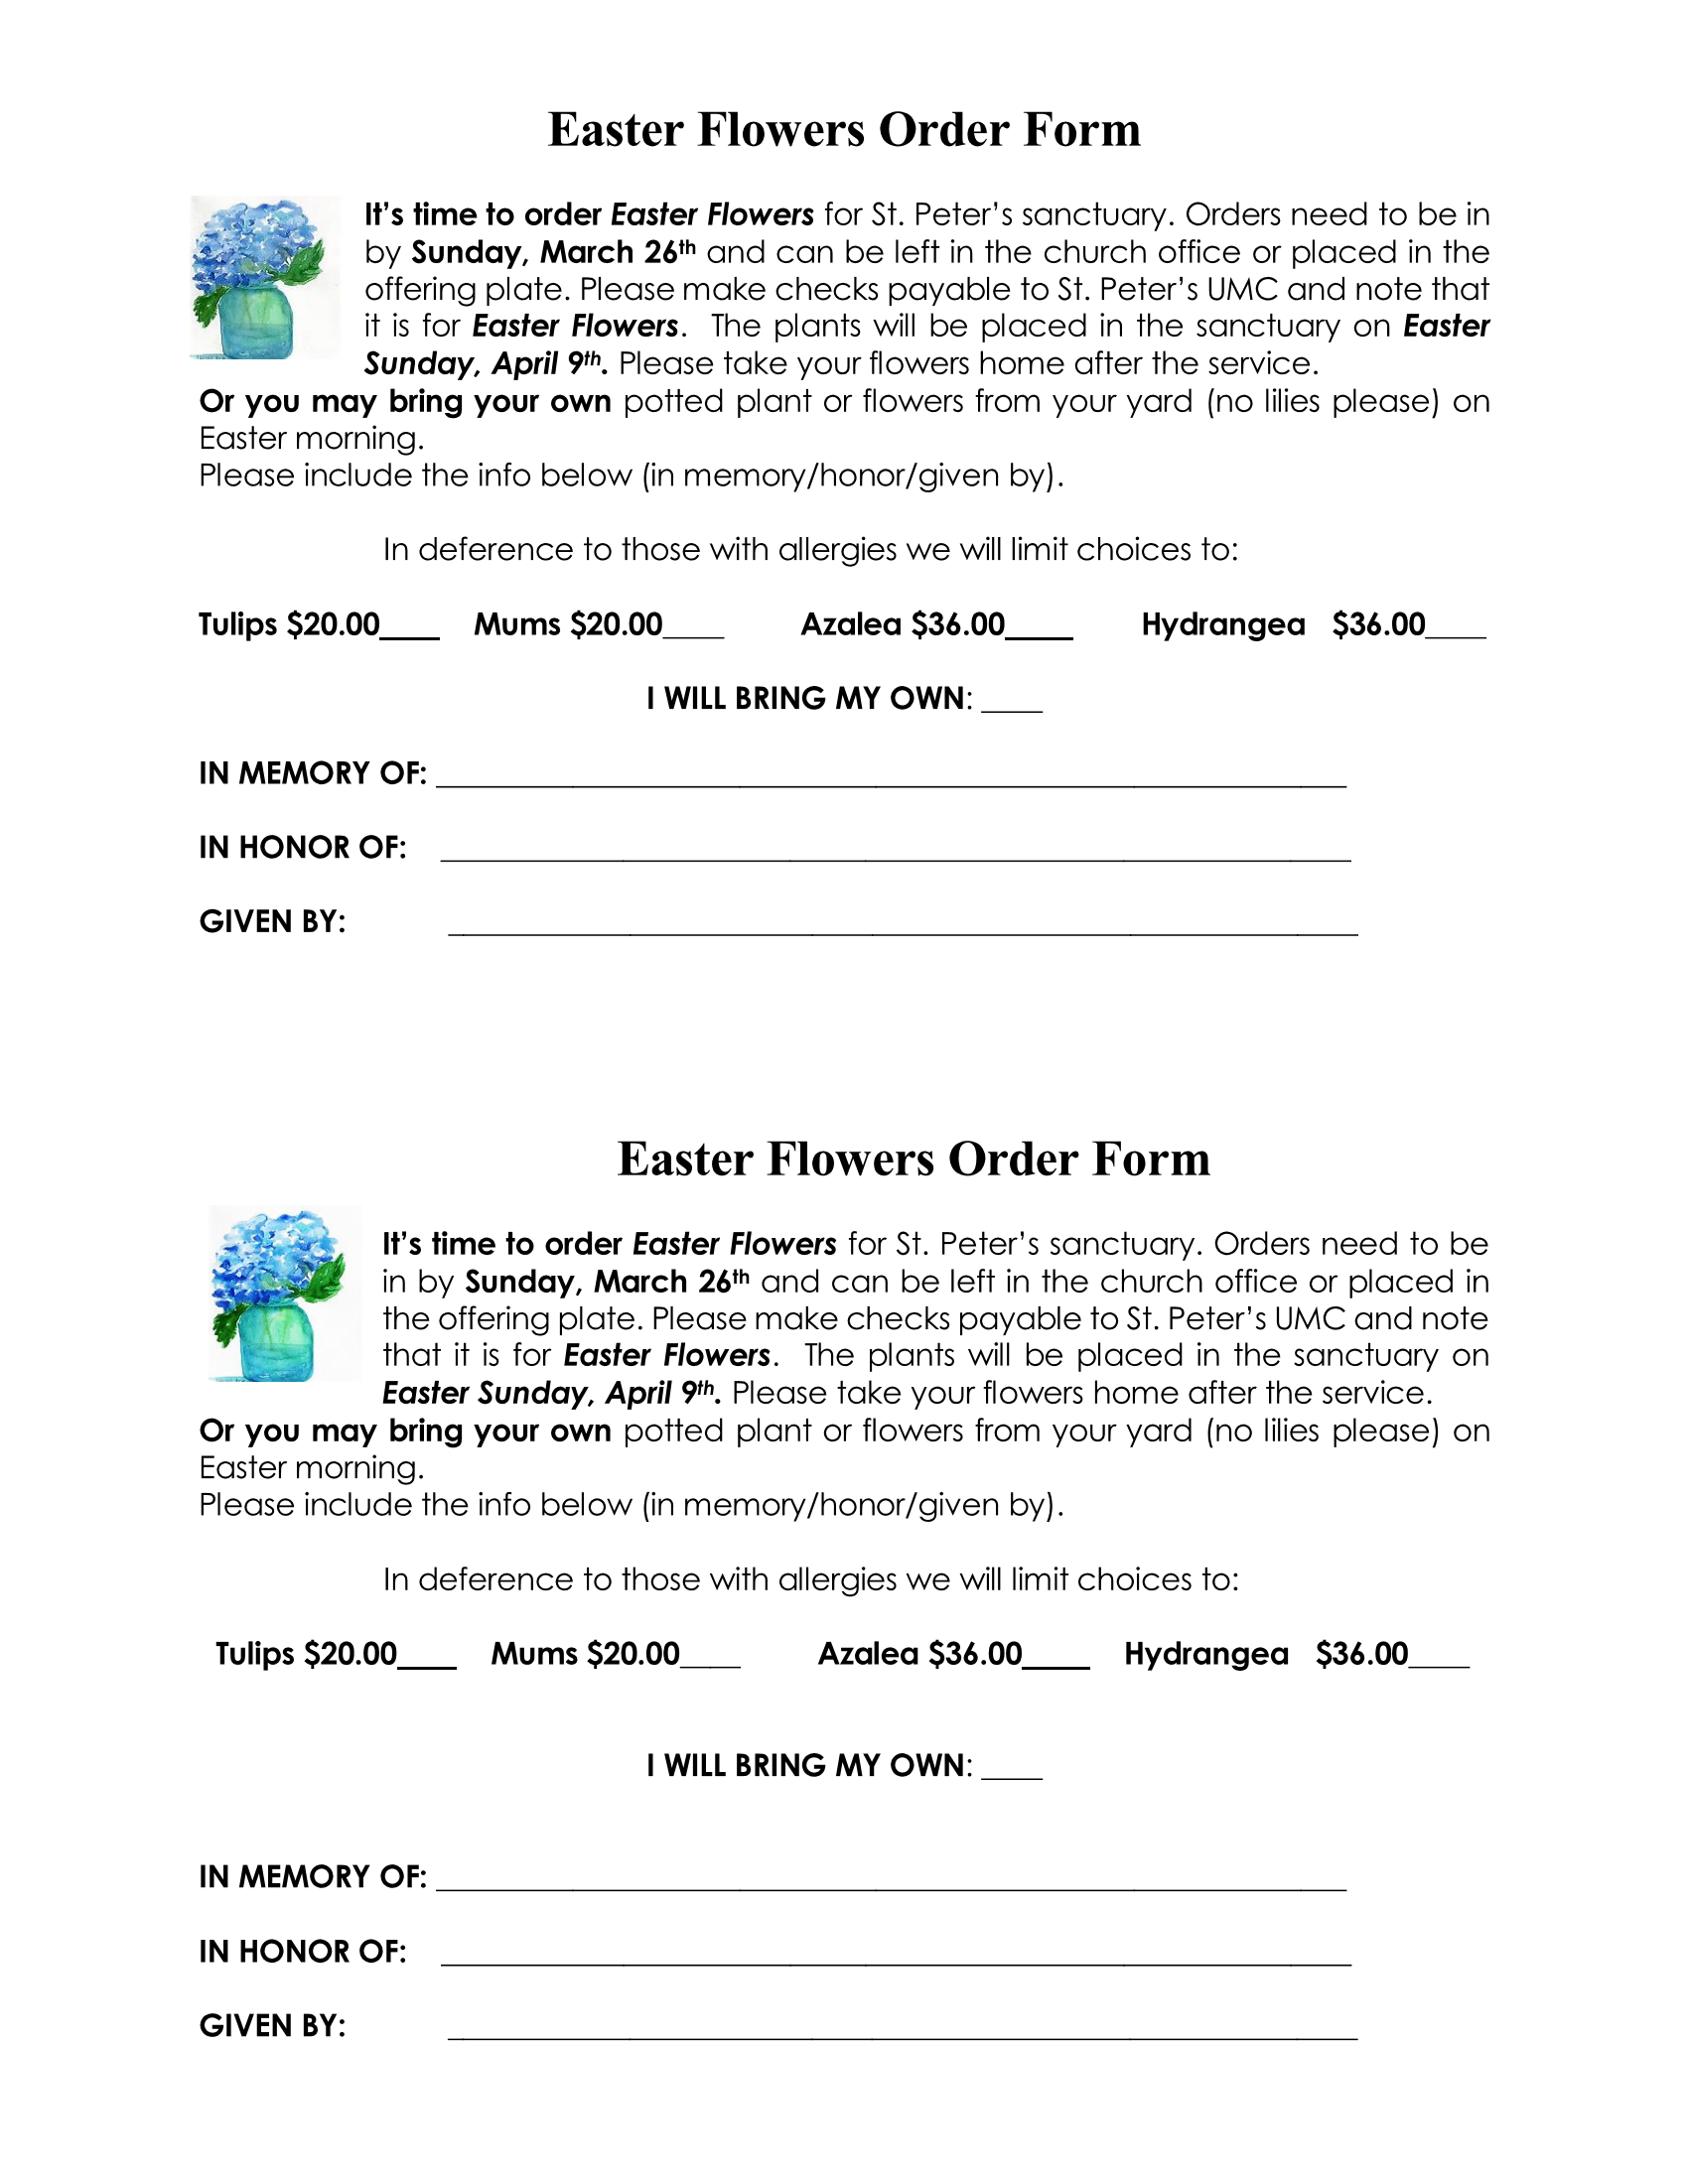 Easter_Flowers_Order_Form_2023_Page_1